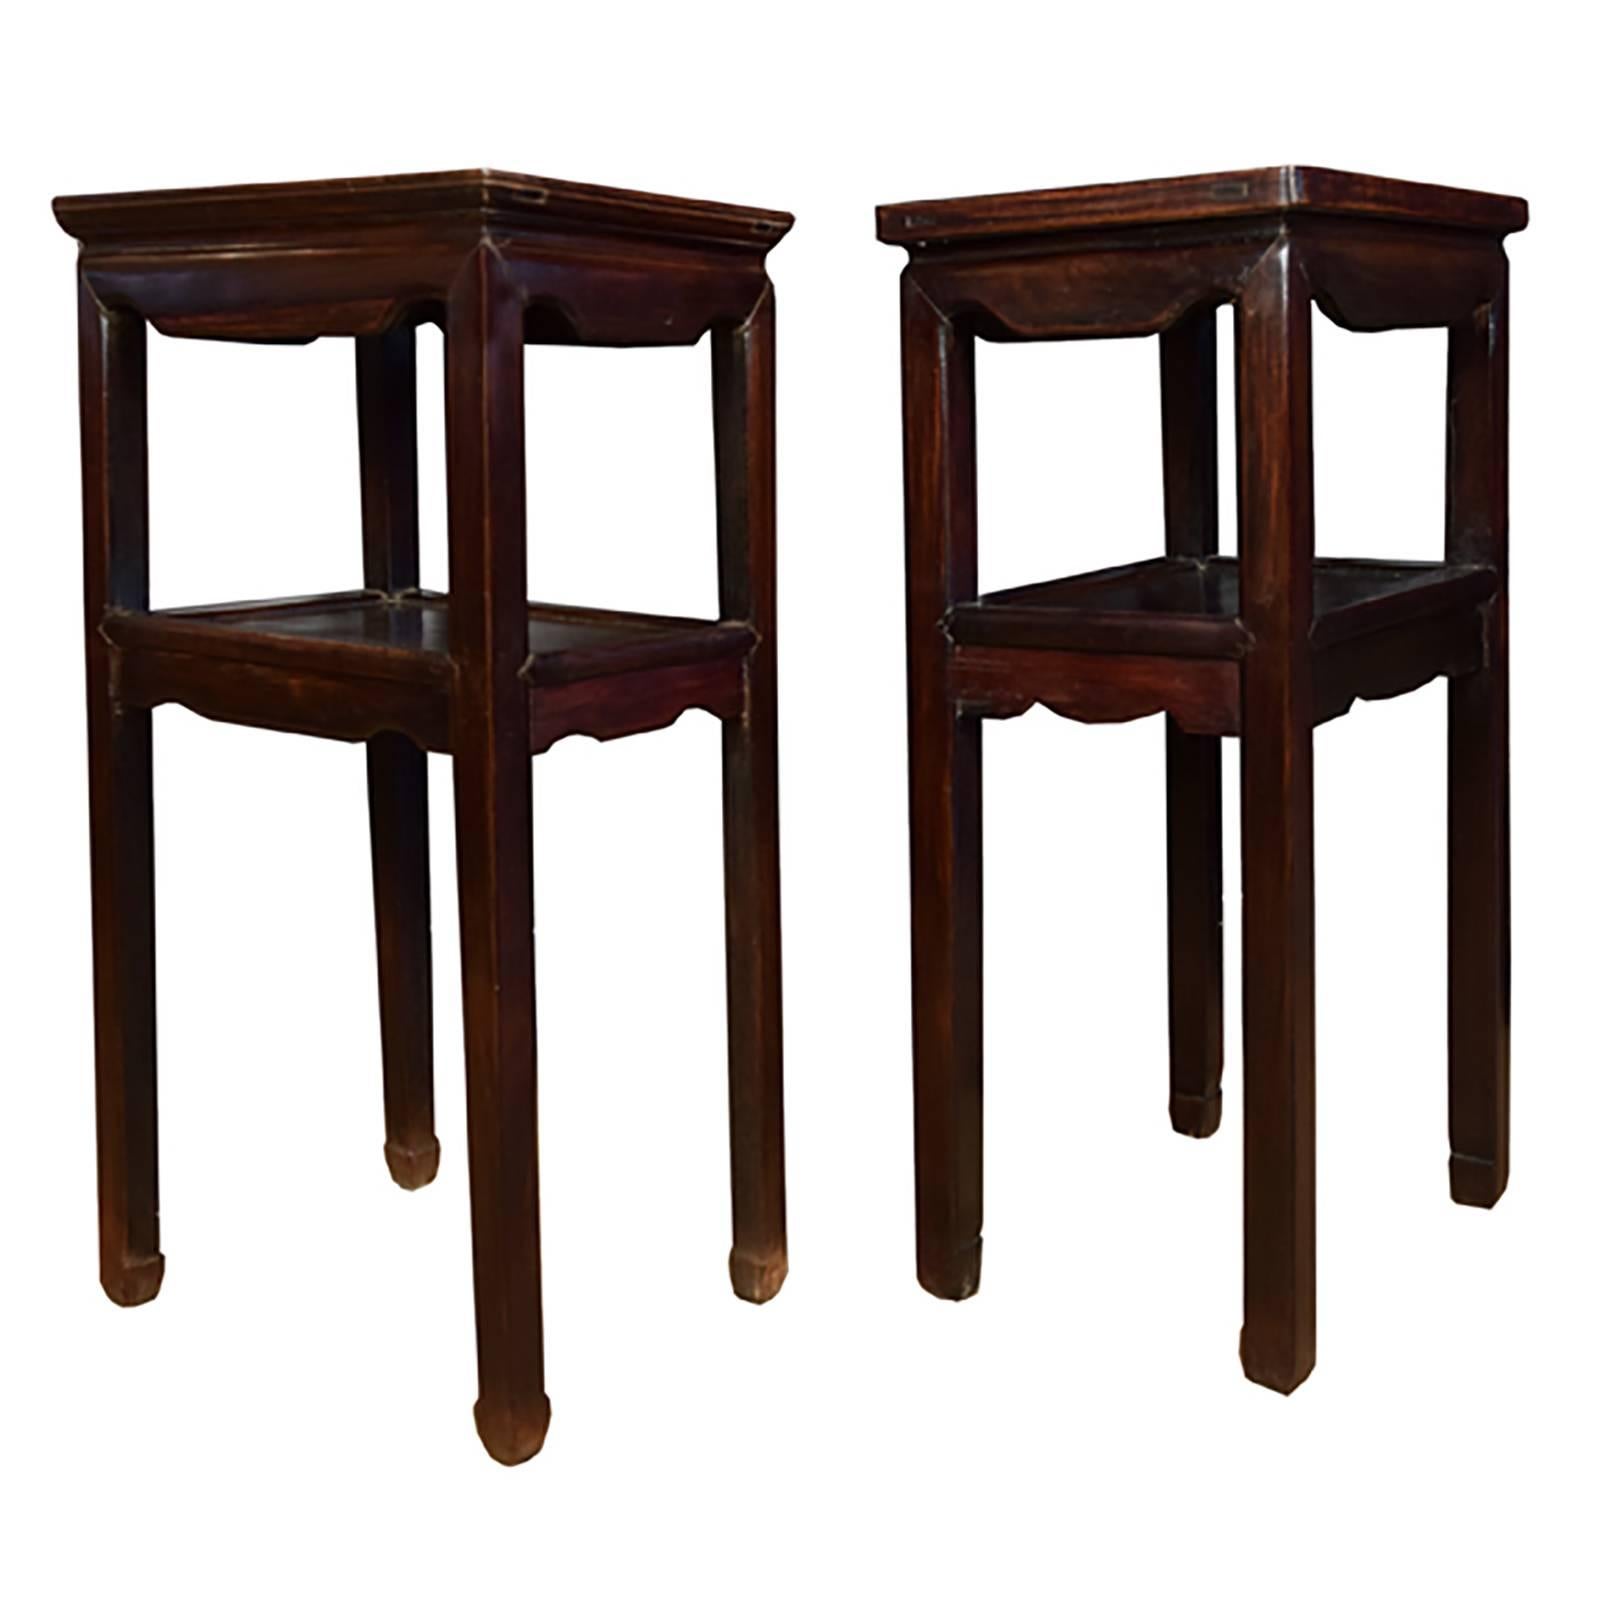 Crafted with mortise and tenon joinery, this skillfully constructed pair of tea tables is minimally detailed with just the suggestion of hoof feet and carved apron to put the full attention on the natural beauty of rosewood. Exhibiting a rich hue,